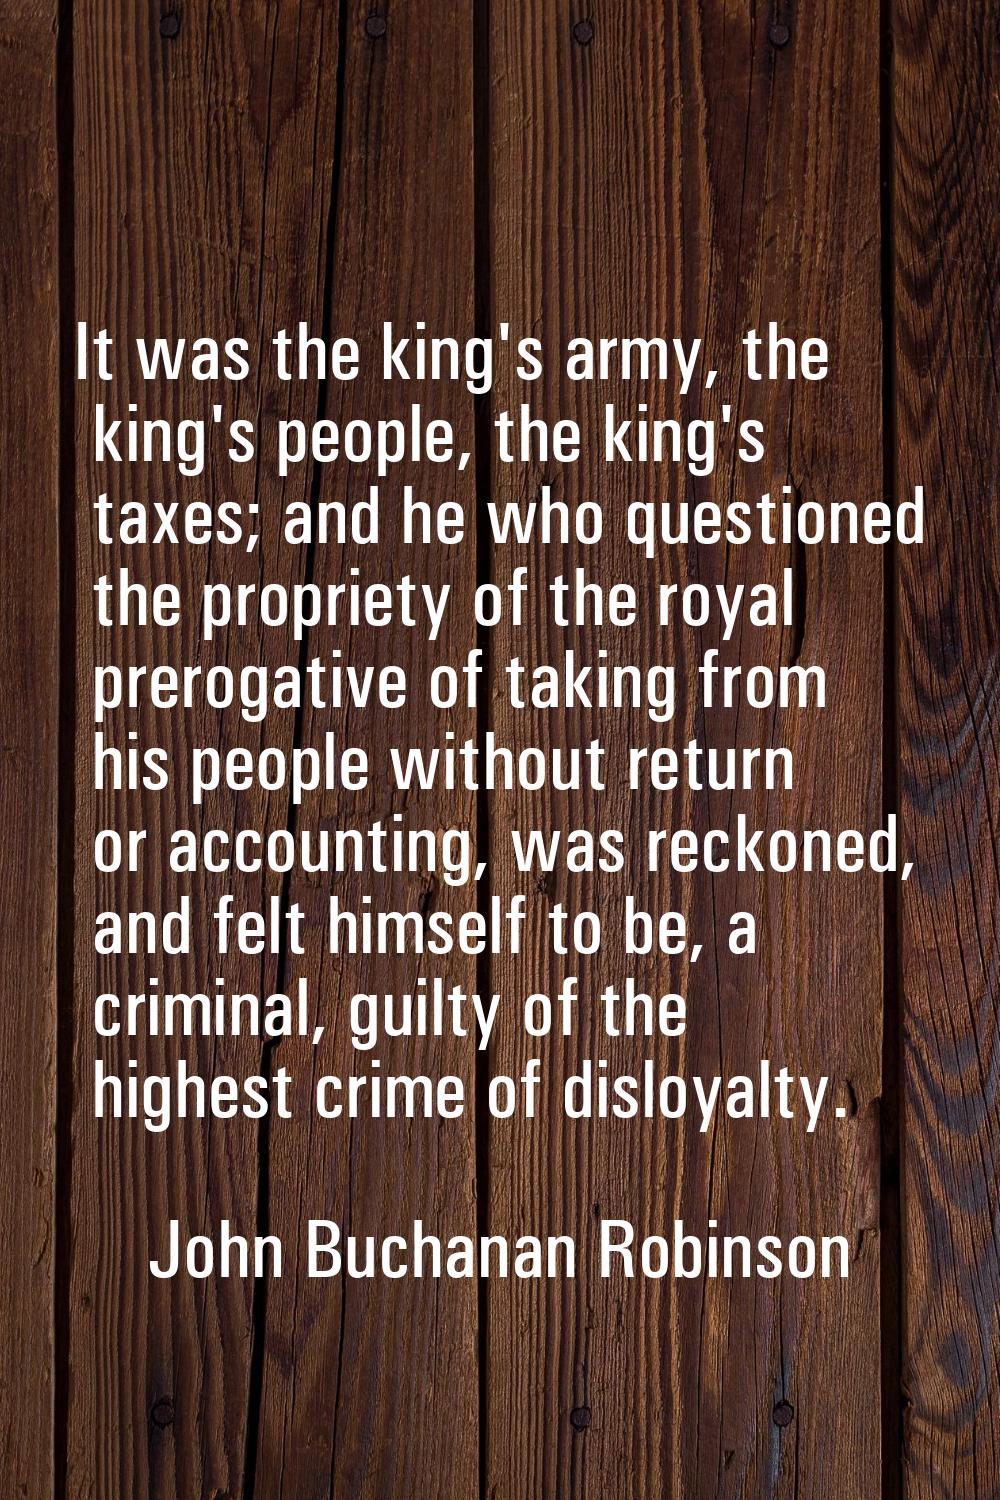 It was the king's army, the king's people, the king's taxes; and he who questioned the propriety of